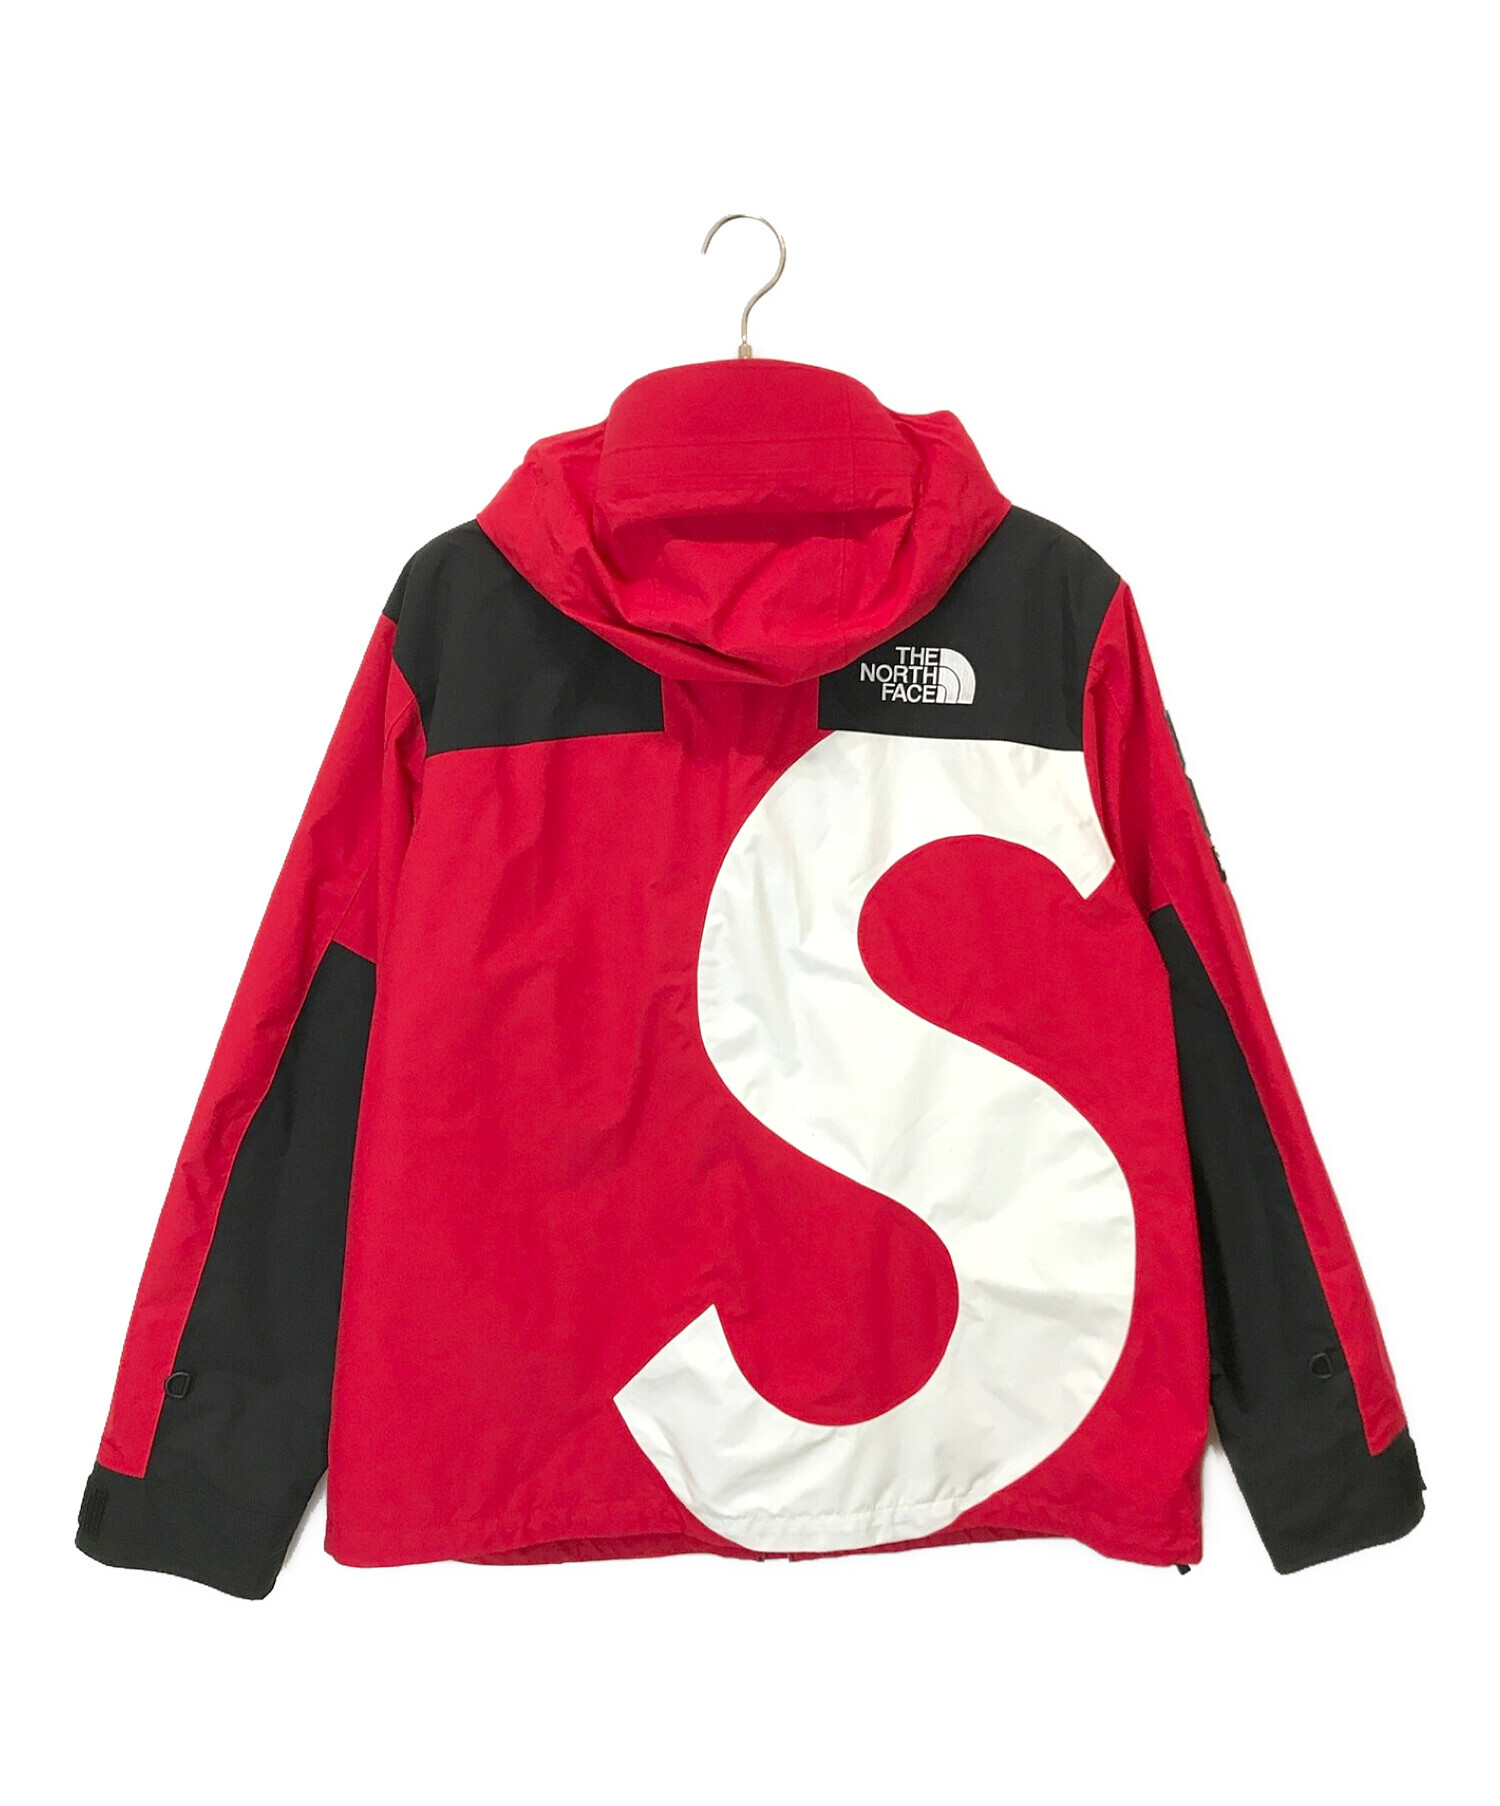 Supreme North Face Mountain Jacket L